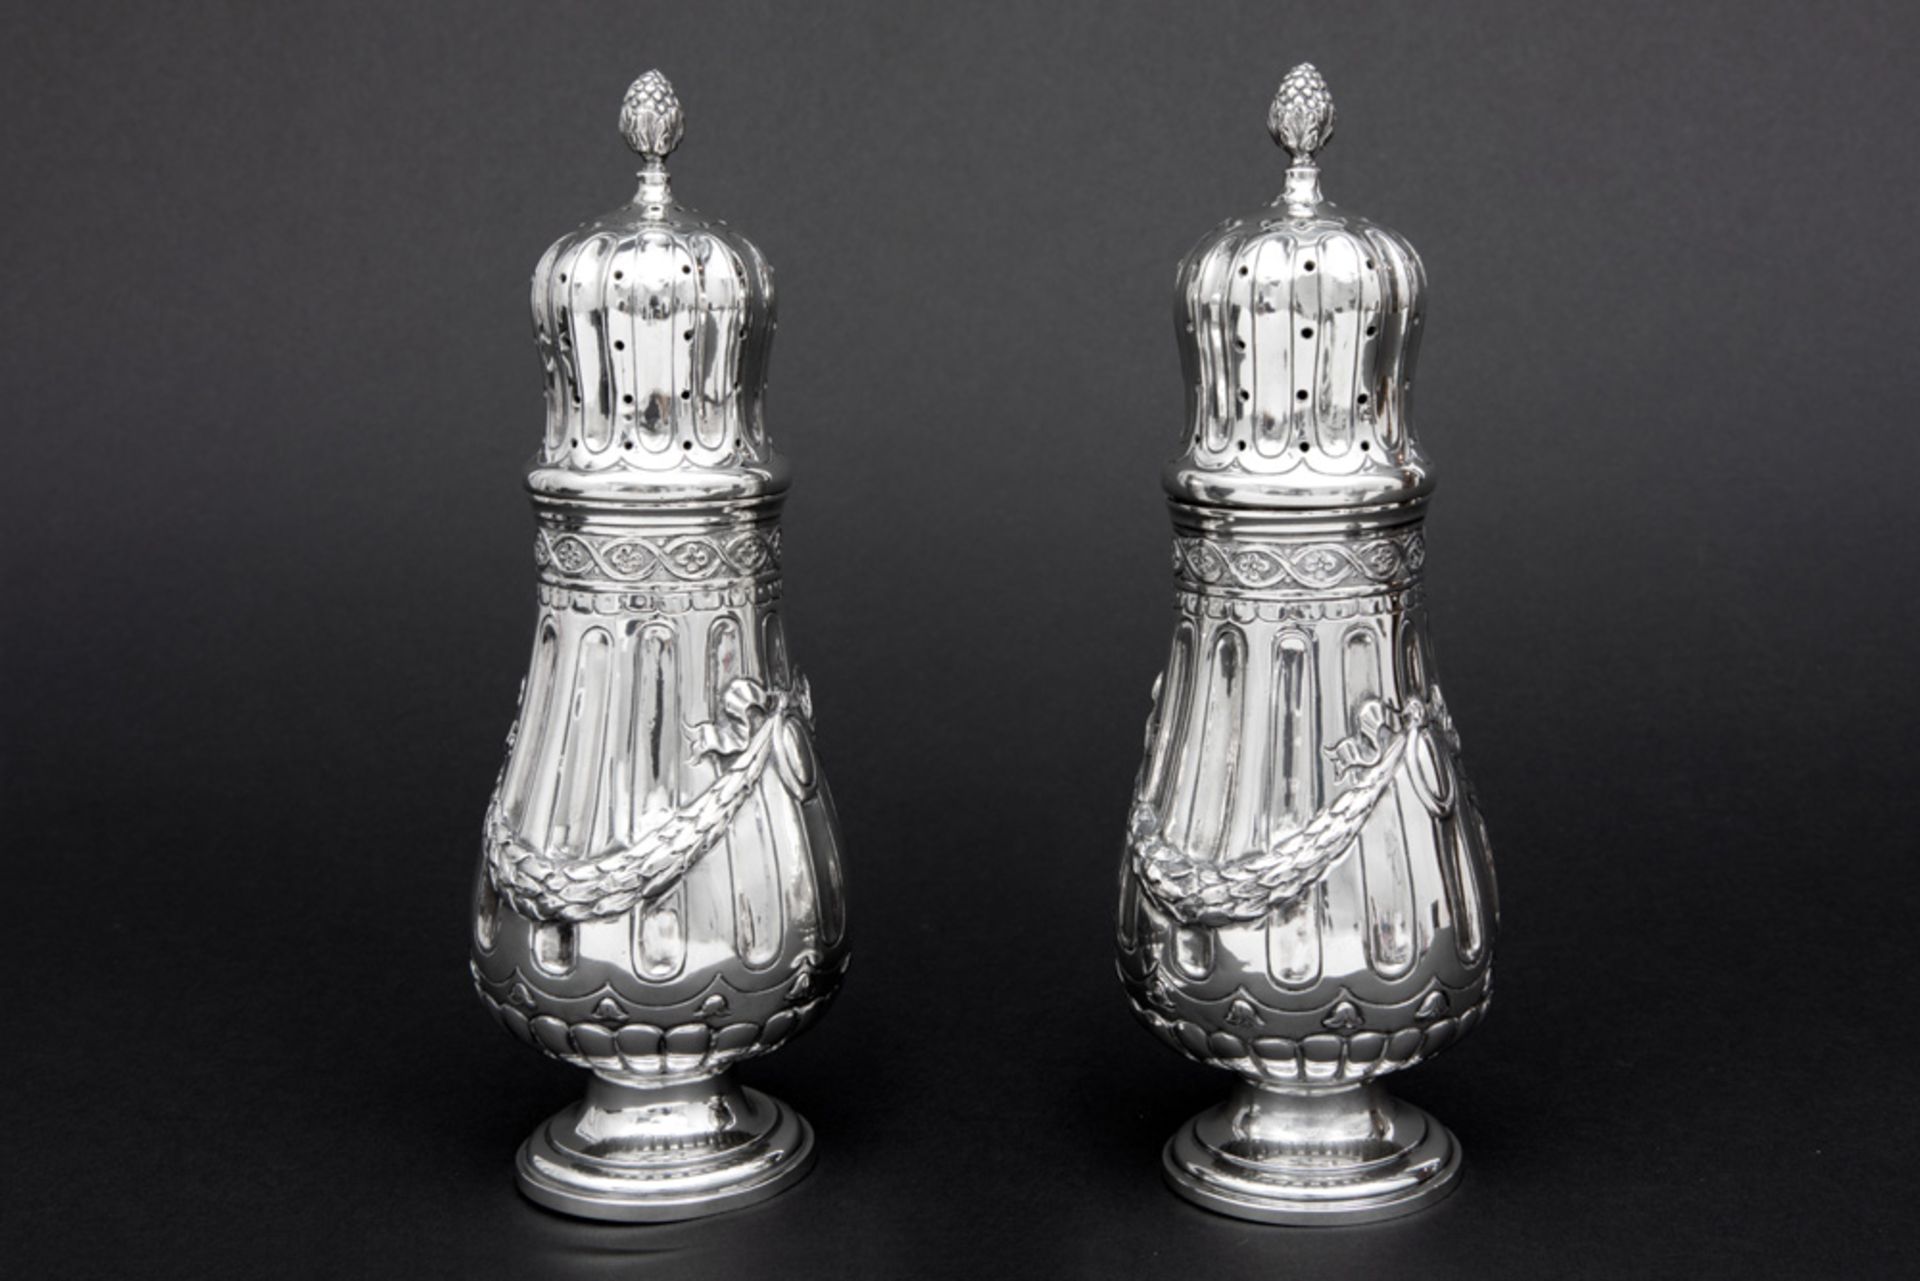 pair of German antique neoclassical casters in marked silver with typical Louis XVI design and - Image 2 of 4